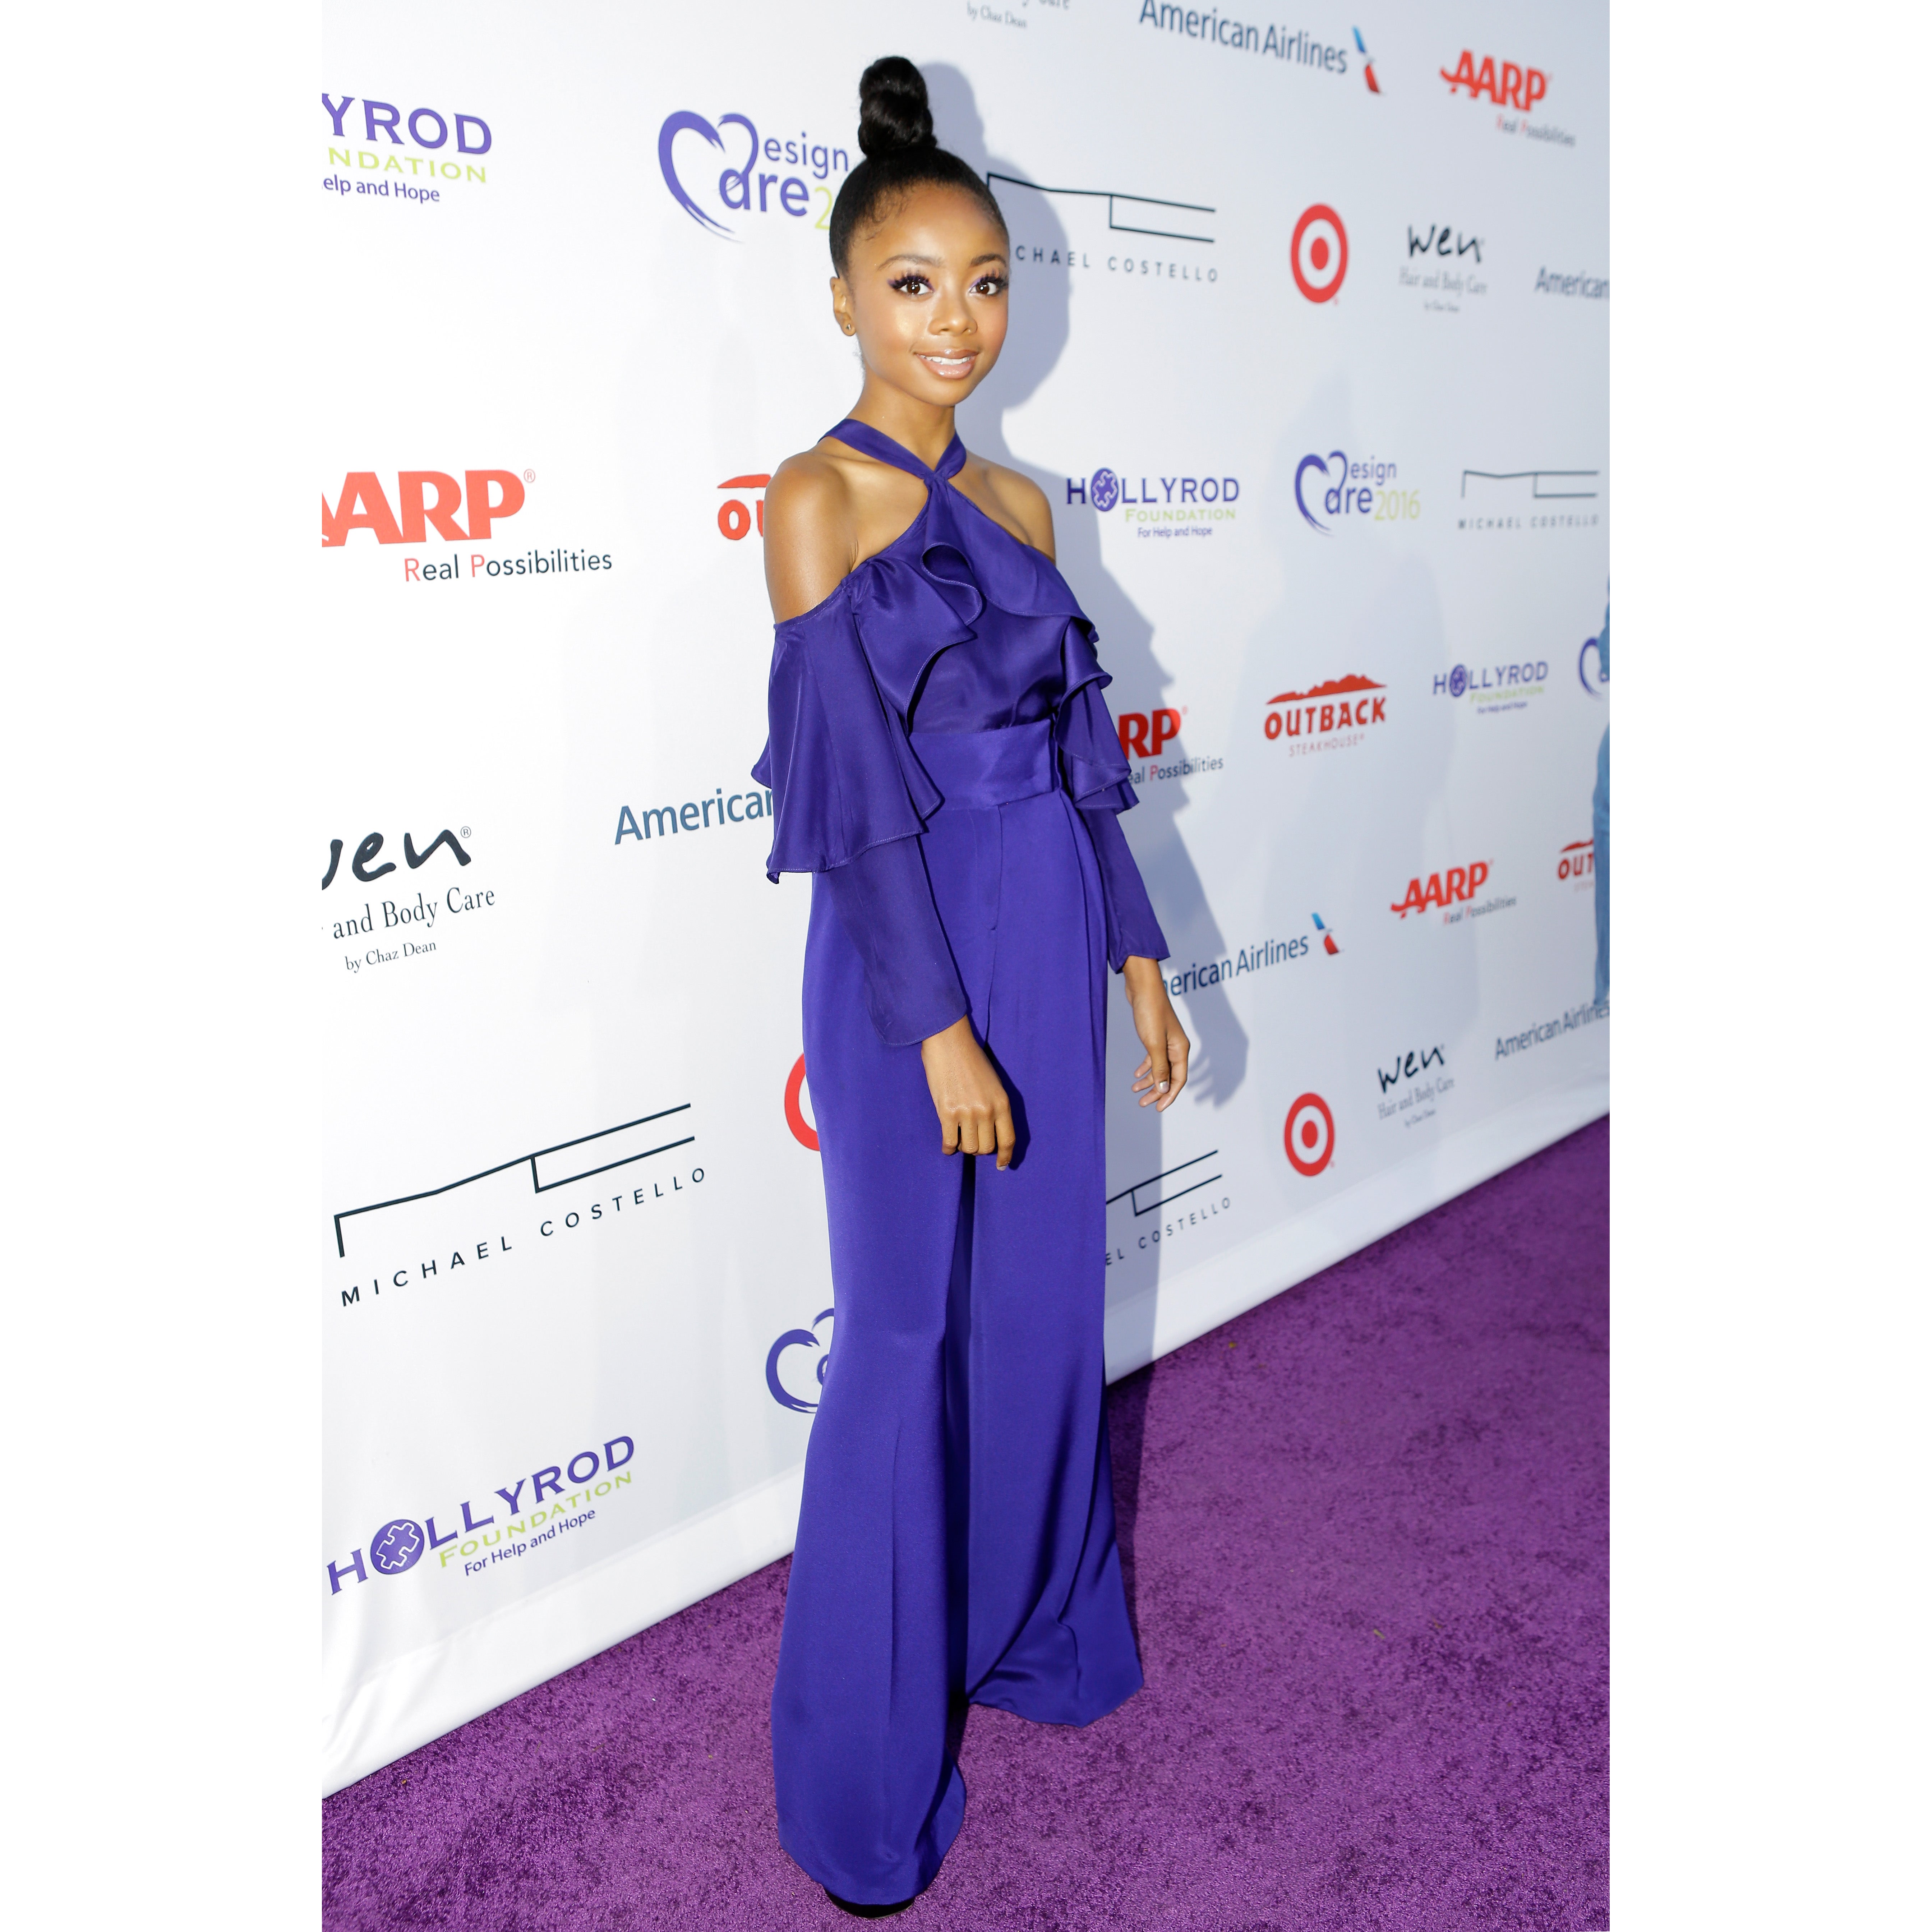 Garcelle Beauvais, FLOTUS, Cynthia Erivo and More Top Our Best Dressed List This Week
